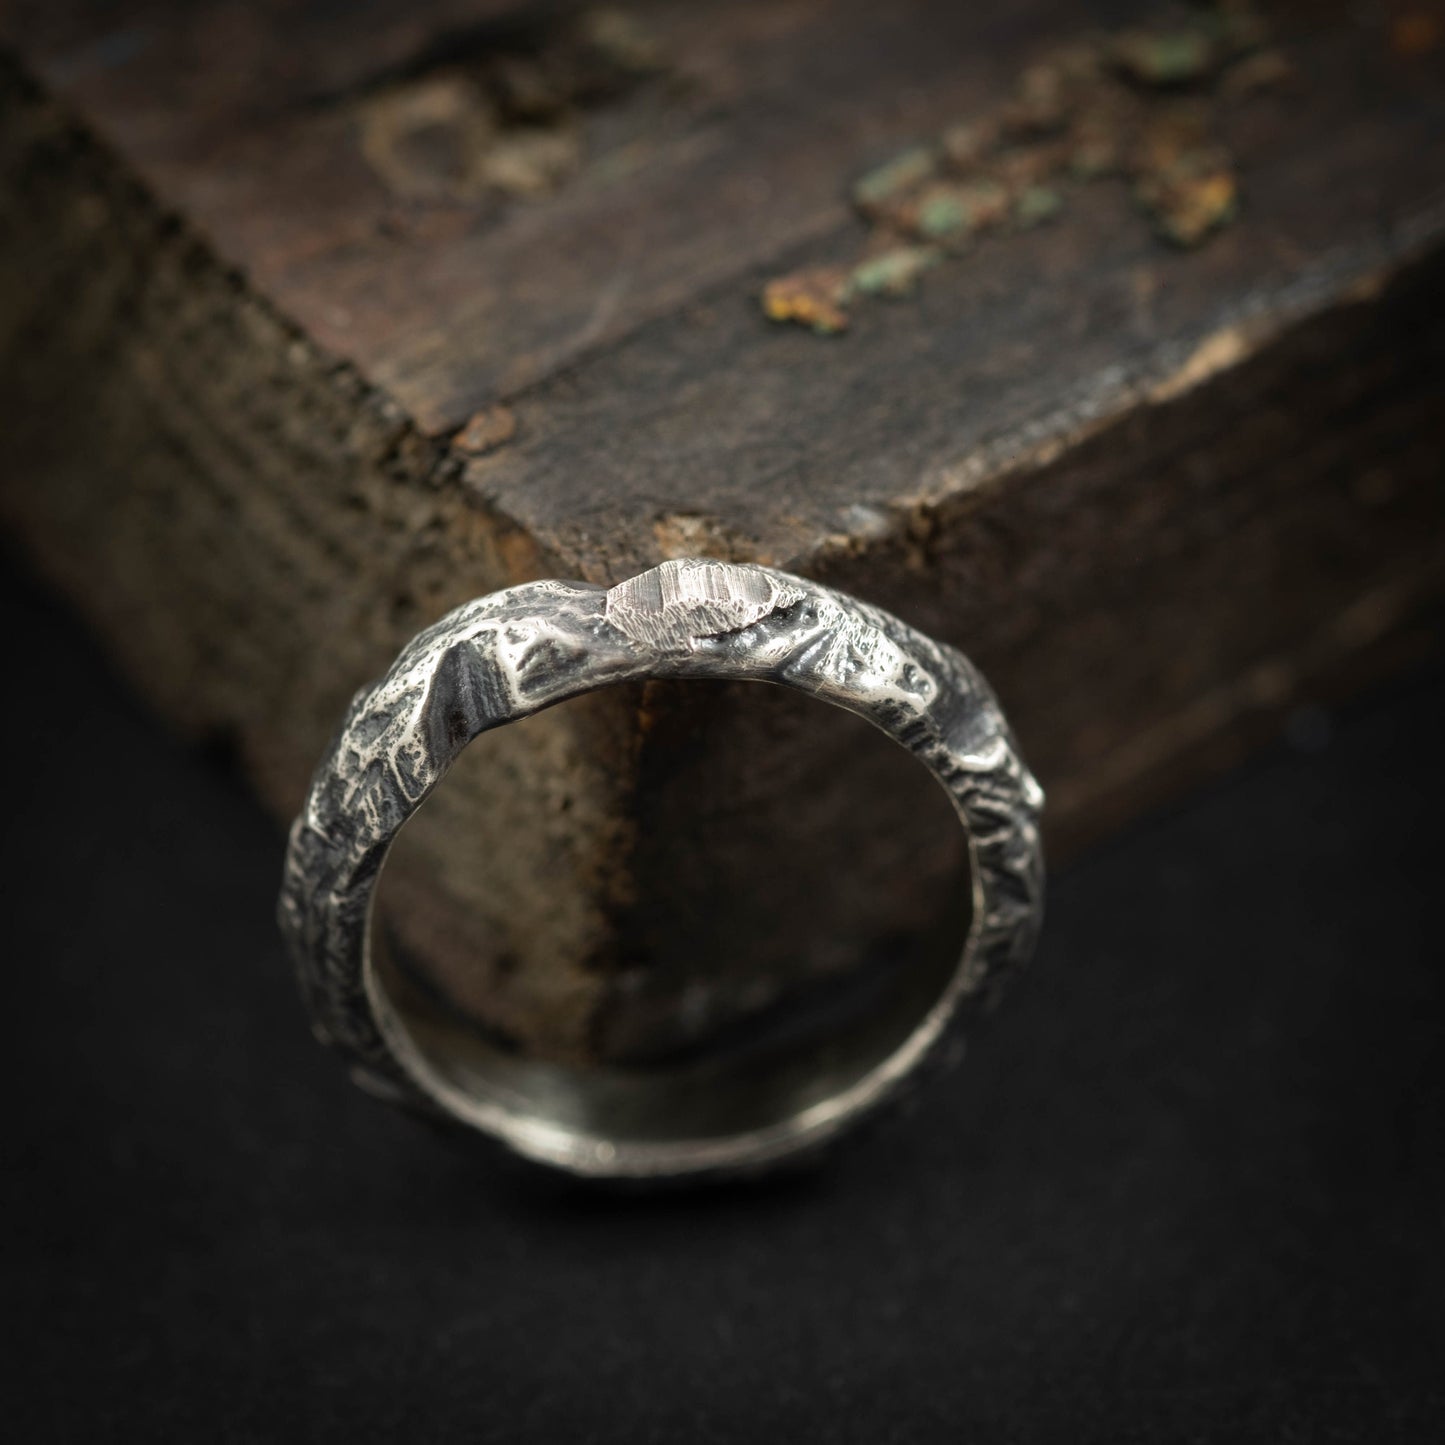 Silver Ring for men, Magic Ring, Handmade silver jewelry, mens gift Dad gift, Boyfriend gift, Mindfulness gift for men,